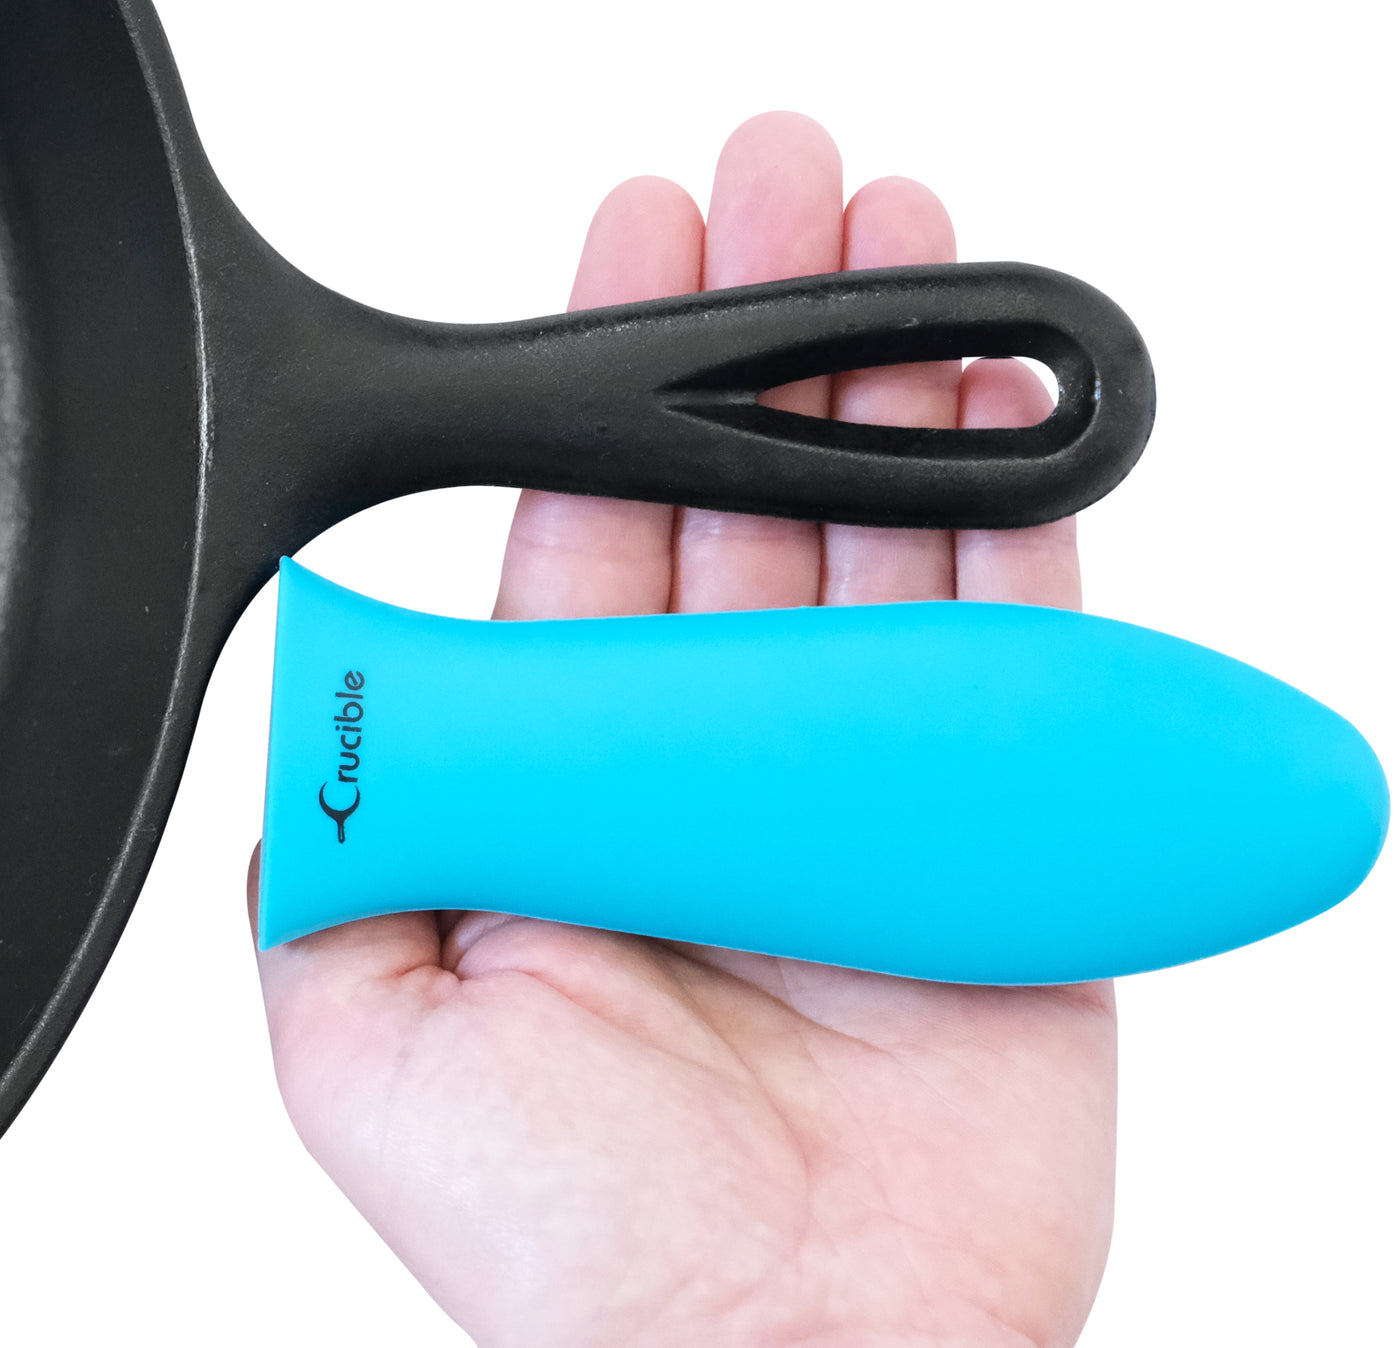 Silicone Hot Handle Holder + Assist Holder, Potholder (2-Pack Turquoise) - Sleeve Grip, Handle Cover